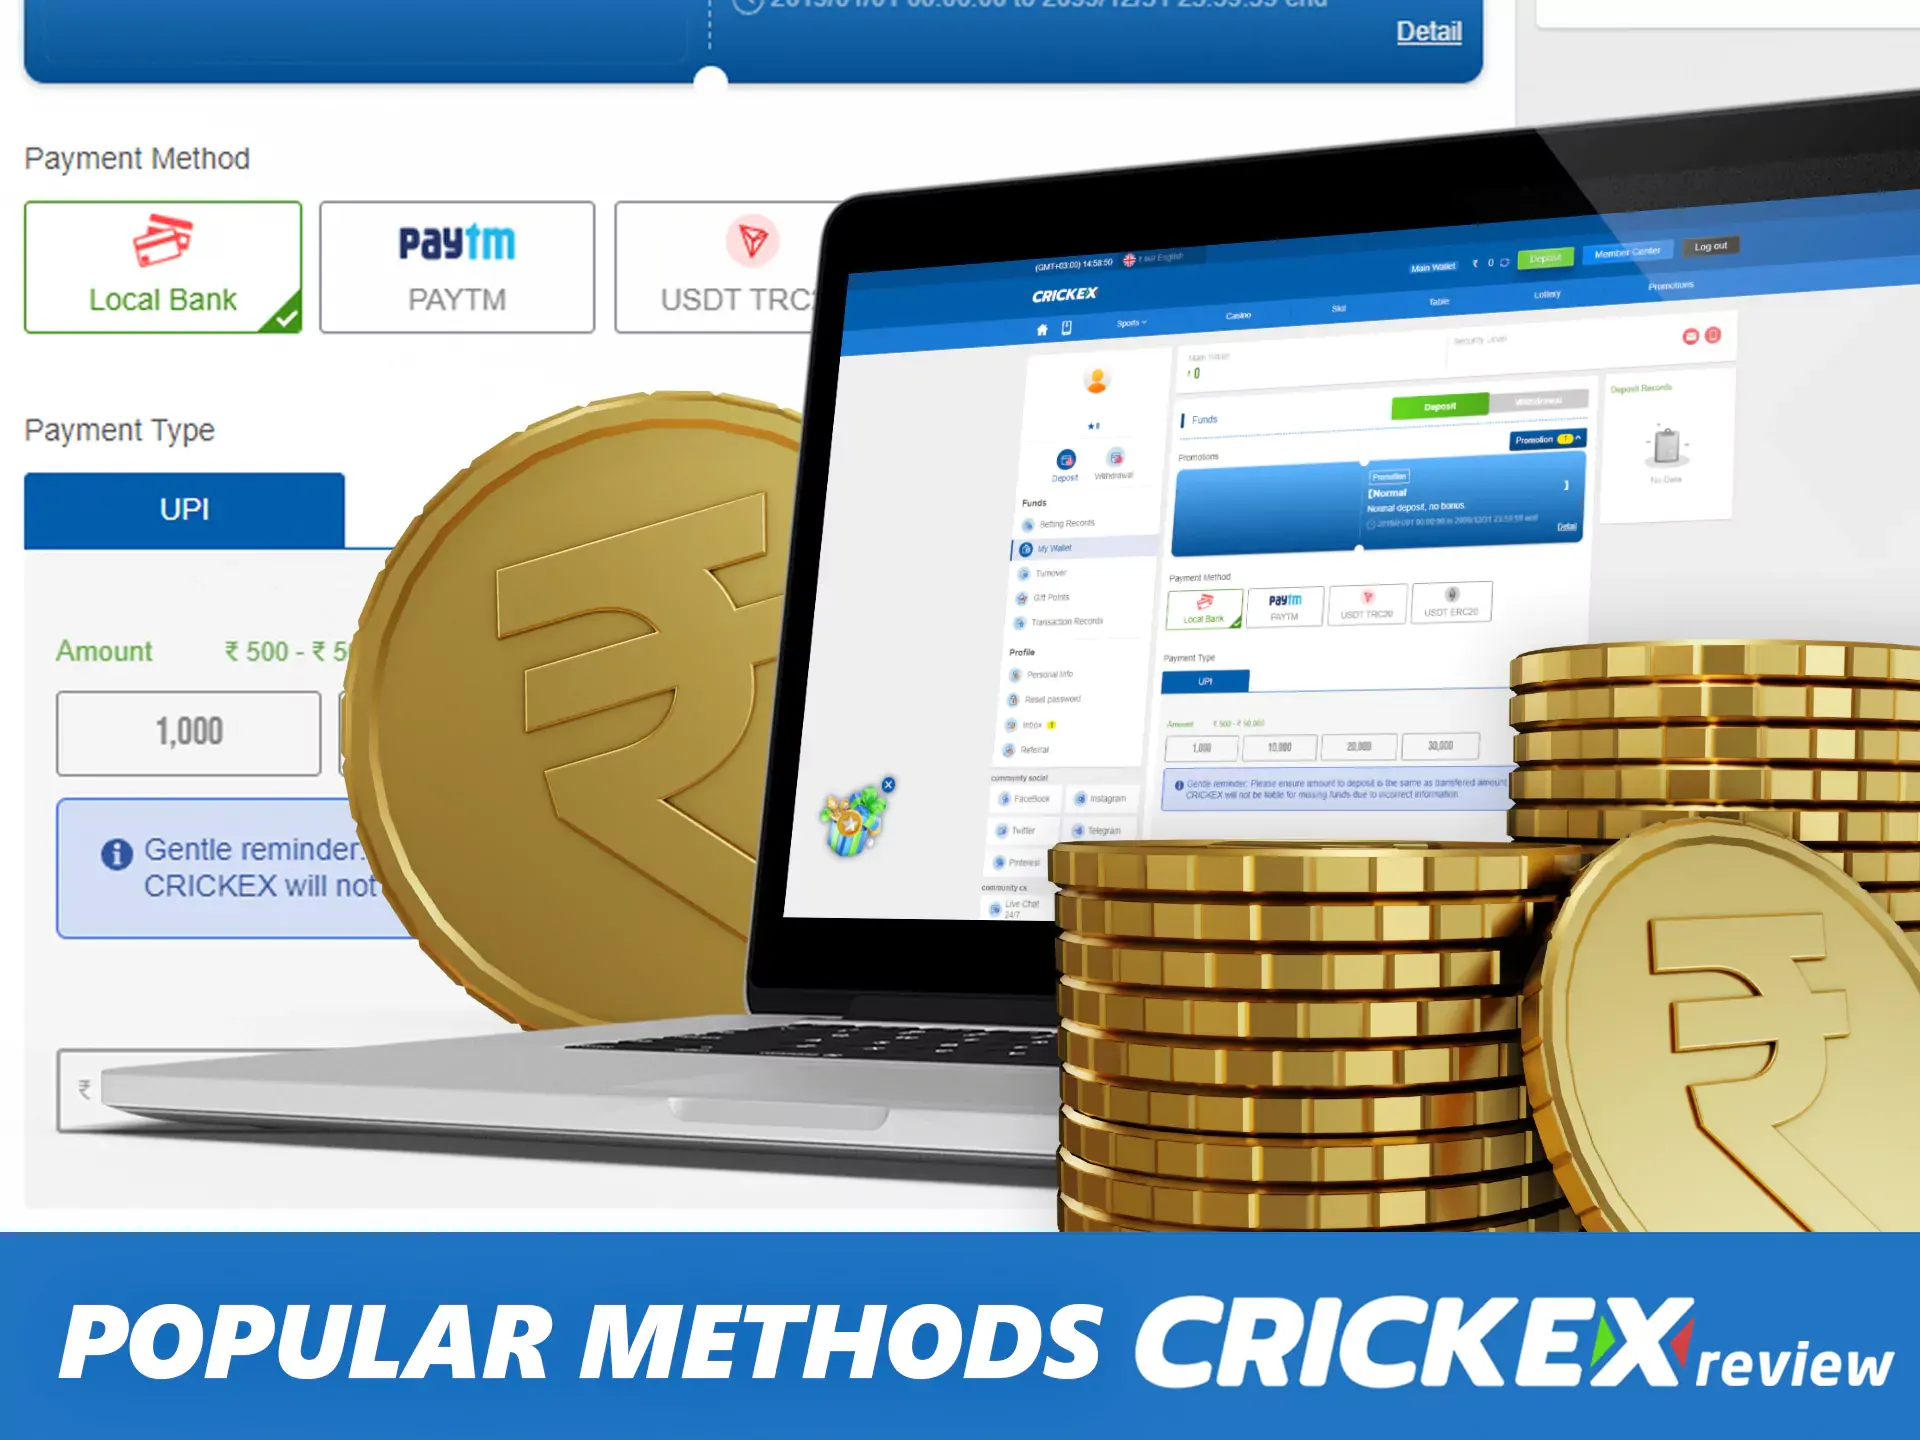 To top up the betting account, you can use a bank card, PayTM wallet, or cryptocurrency.